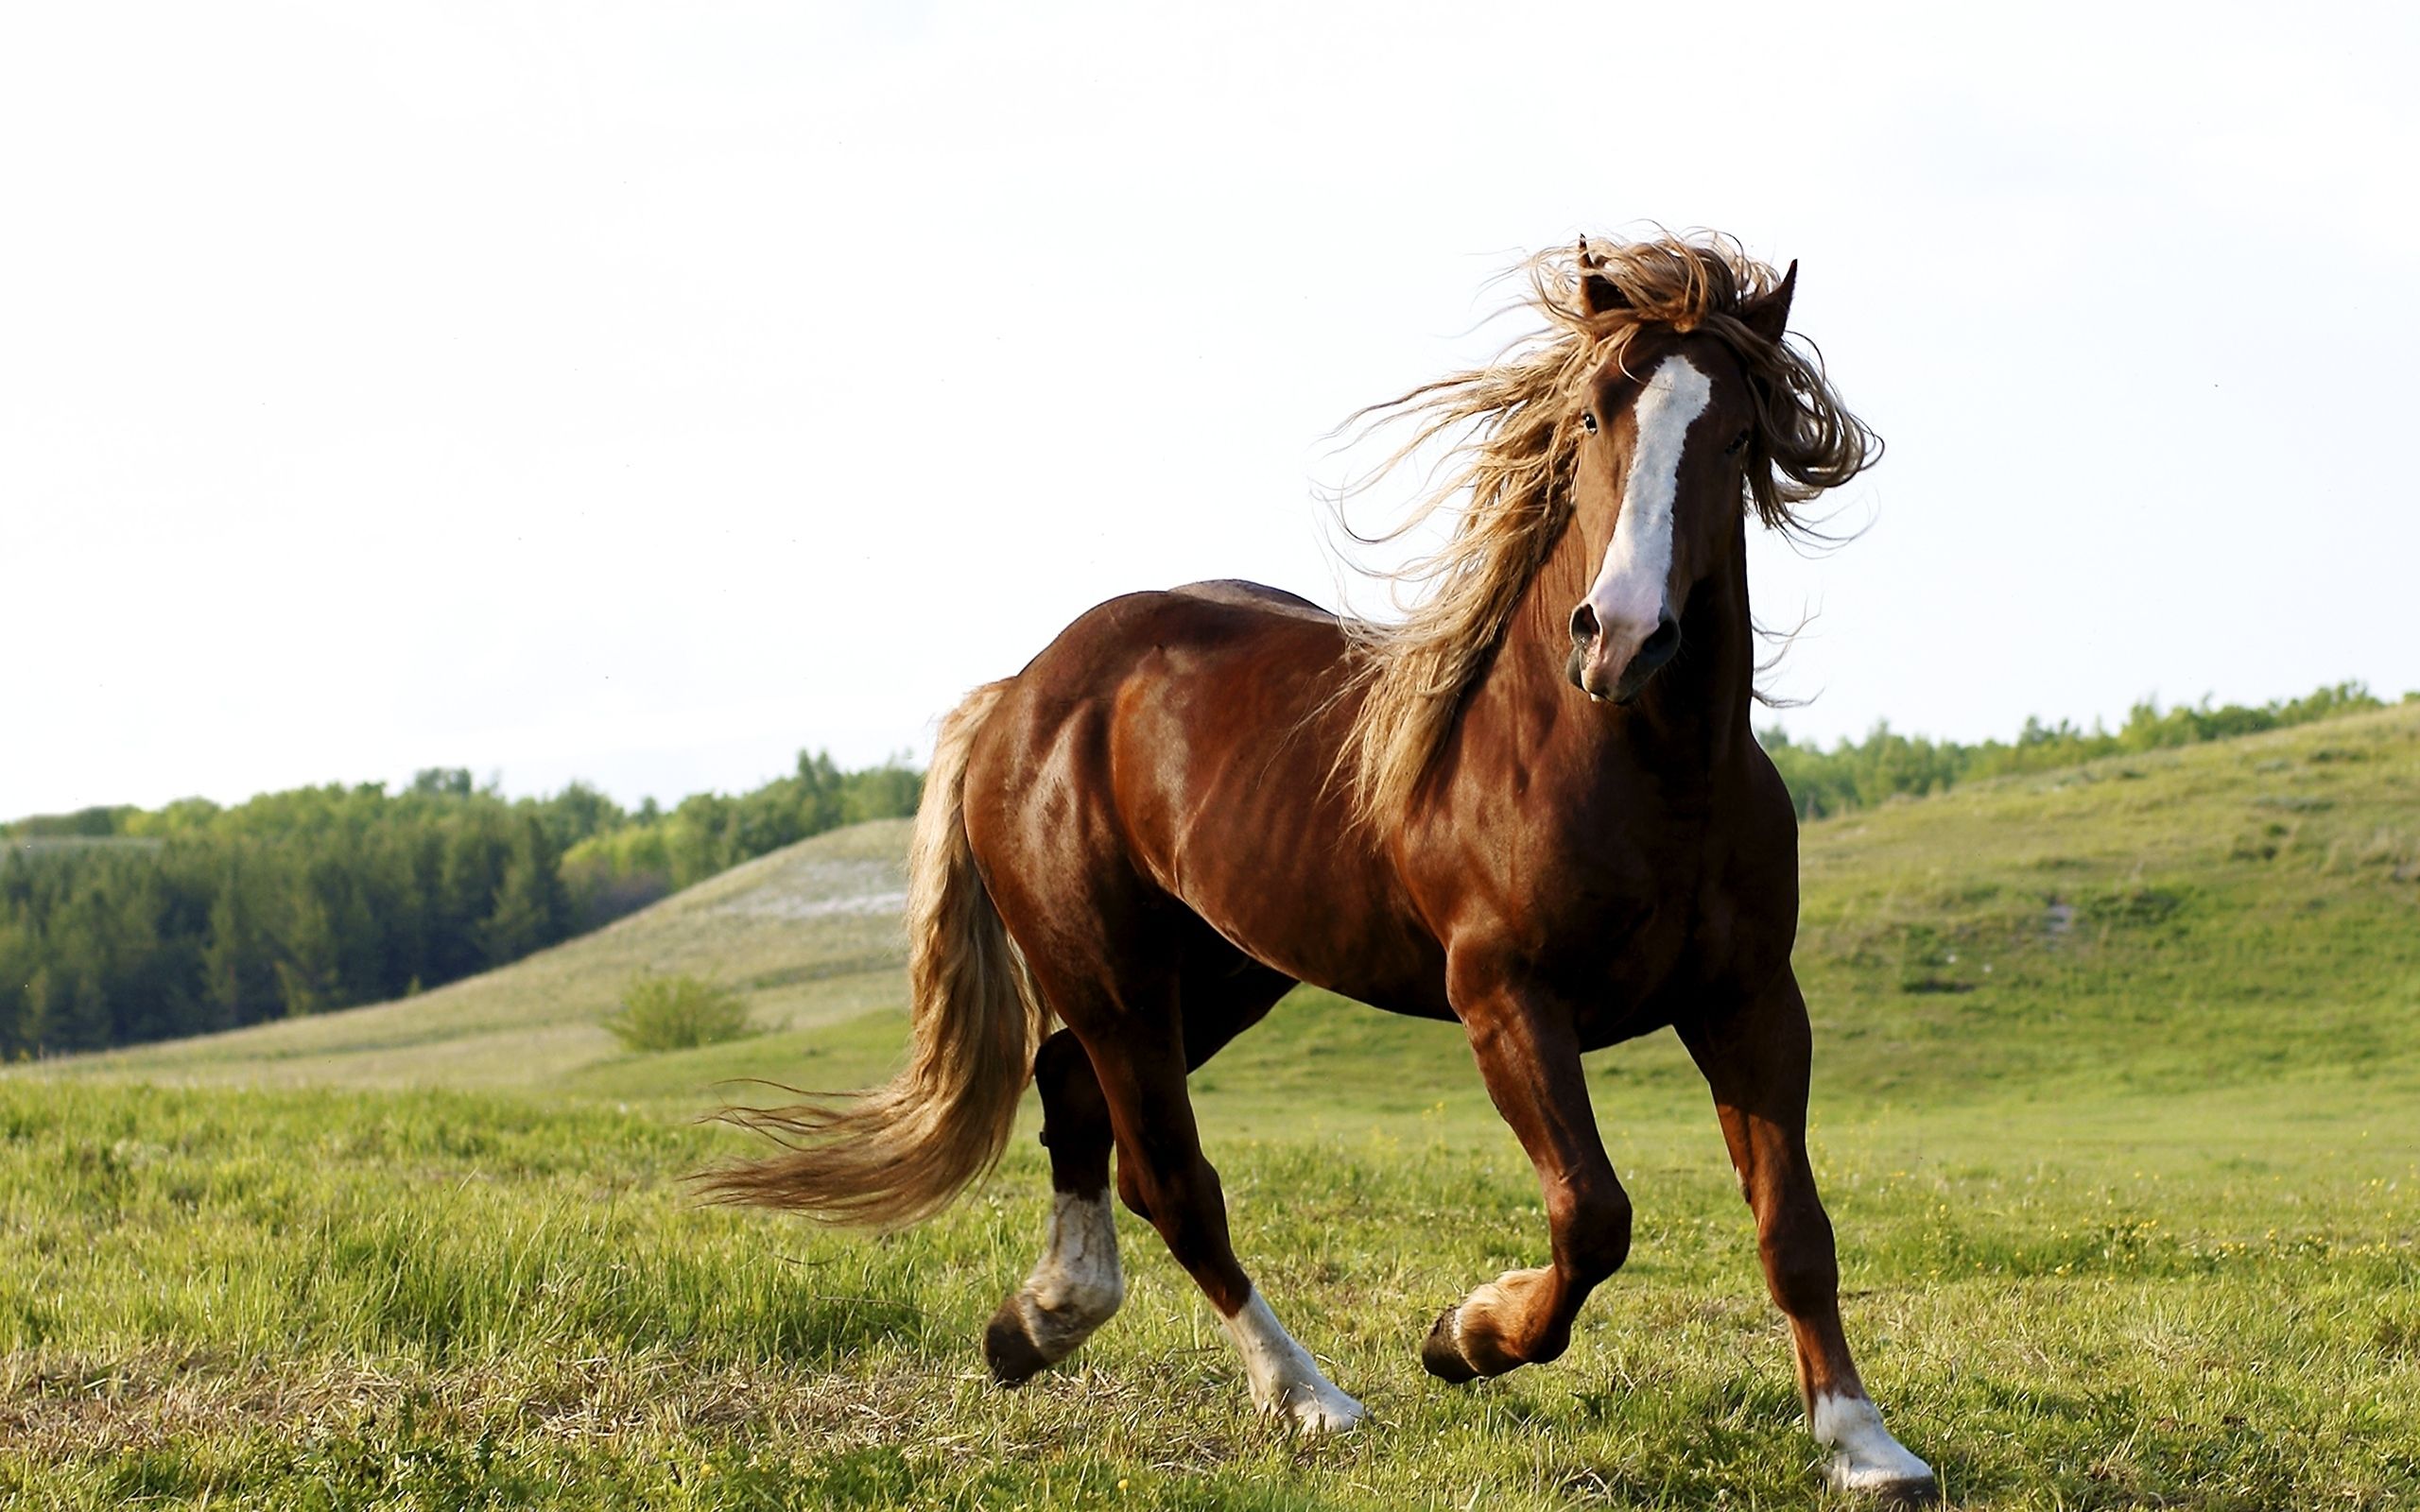 Riding a horse wallpapers and images - wallpapers, pictures, photos